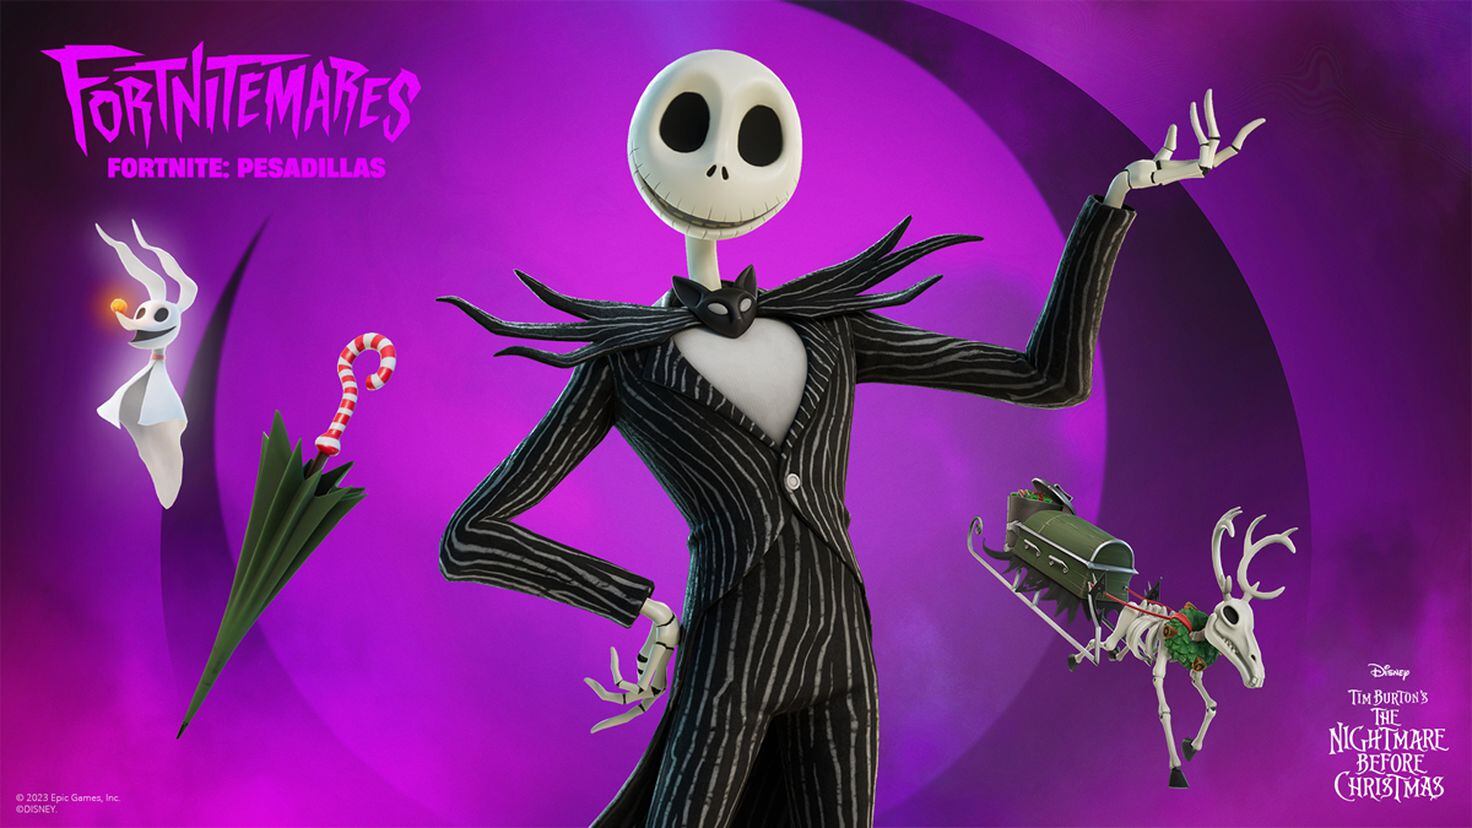 Jack Skeleton is coming to Fortnite: this is the new skin from the Disney movie “Nightmare Before Christmas”